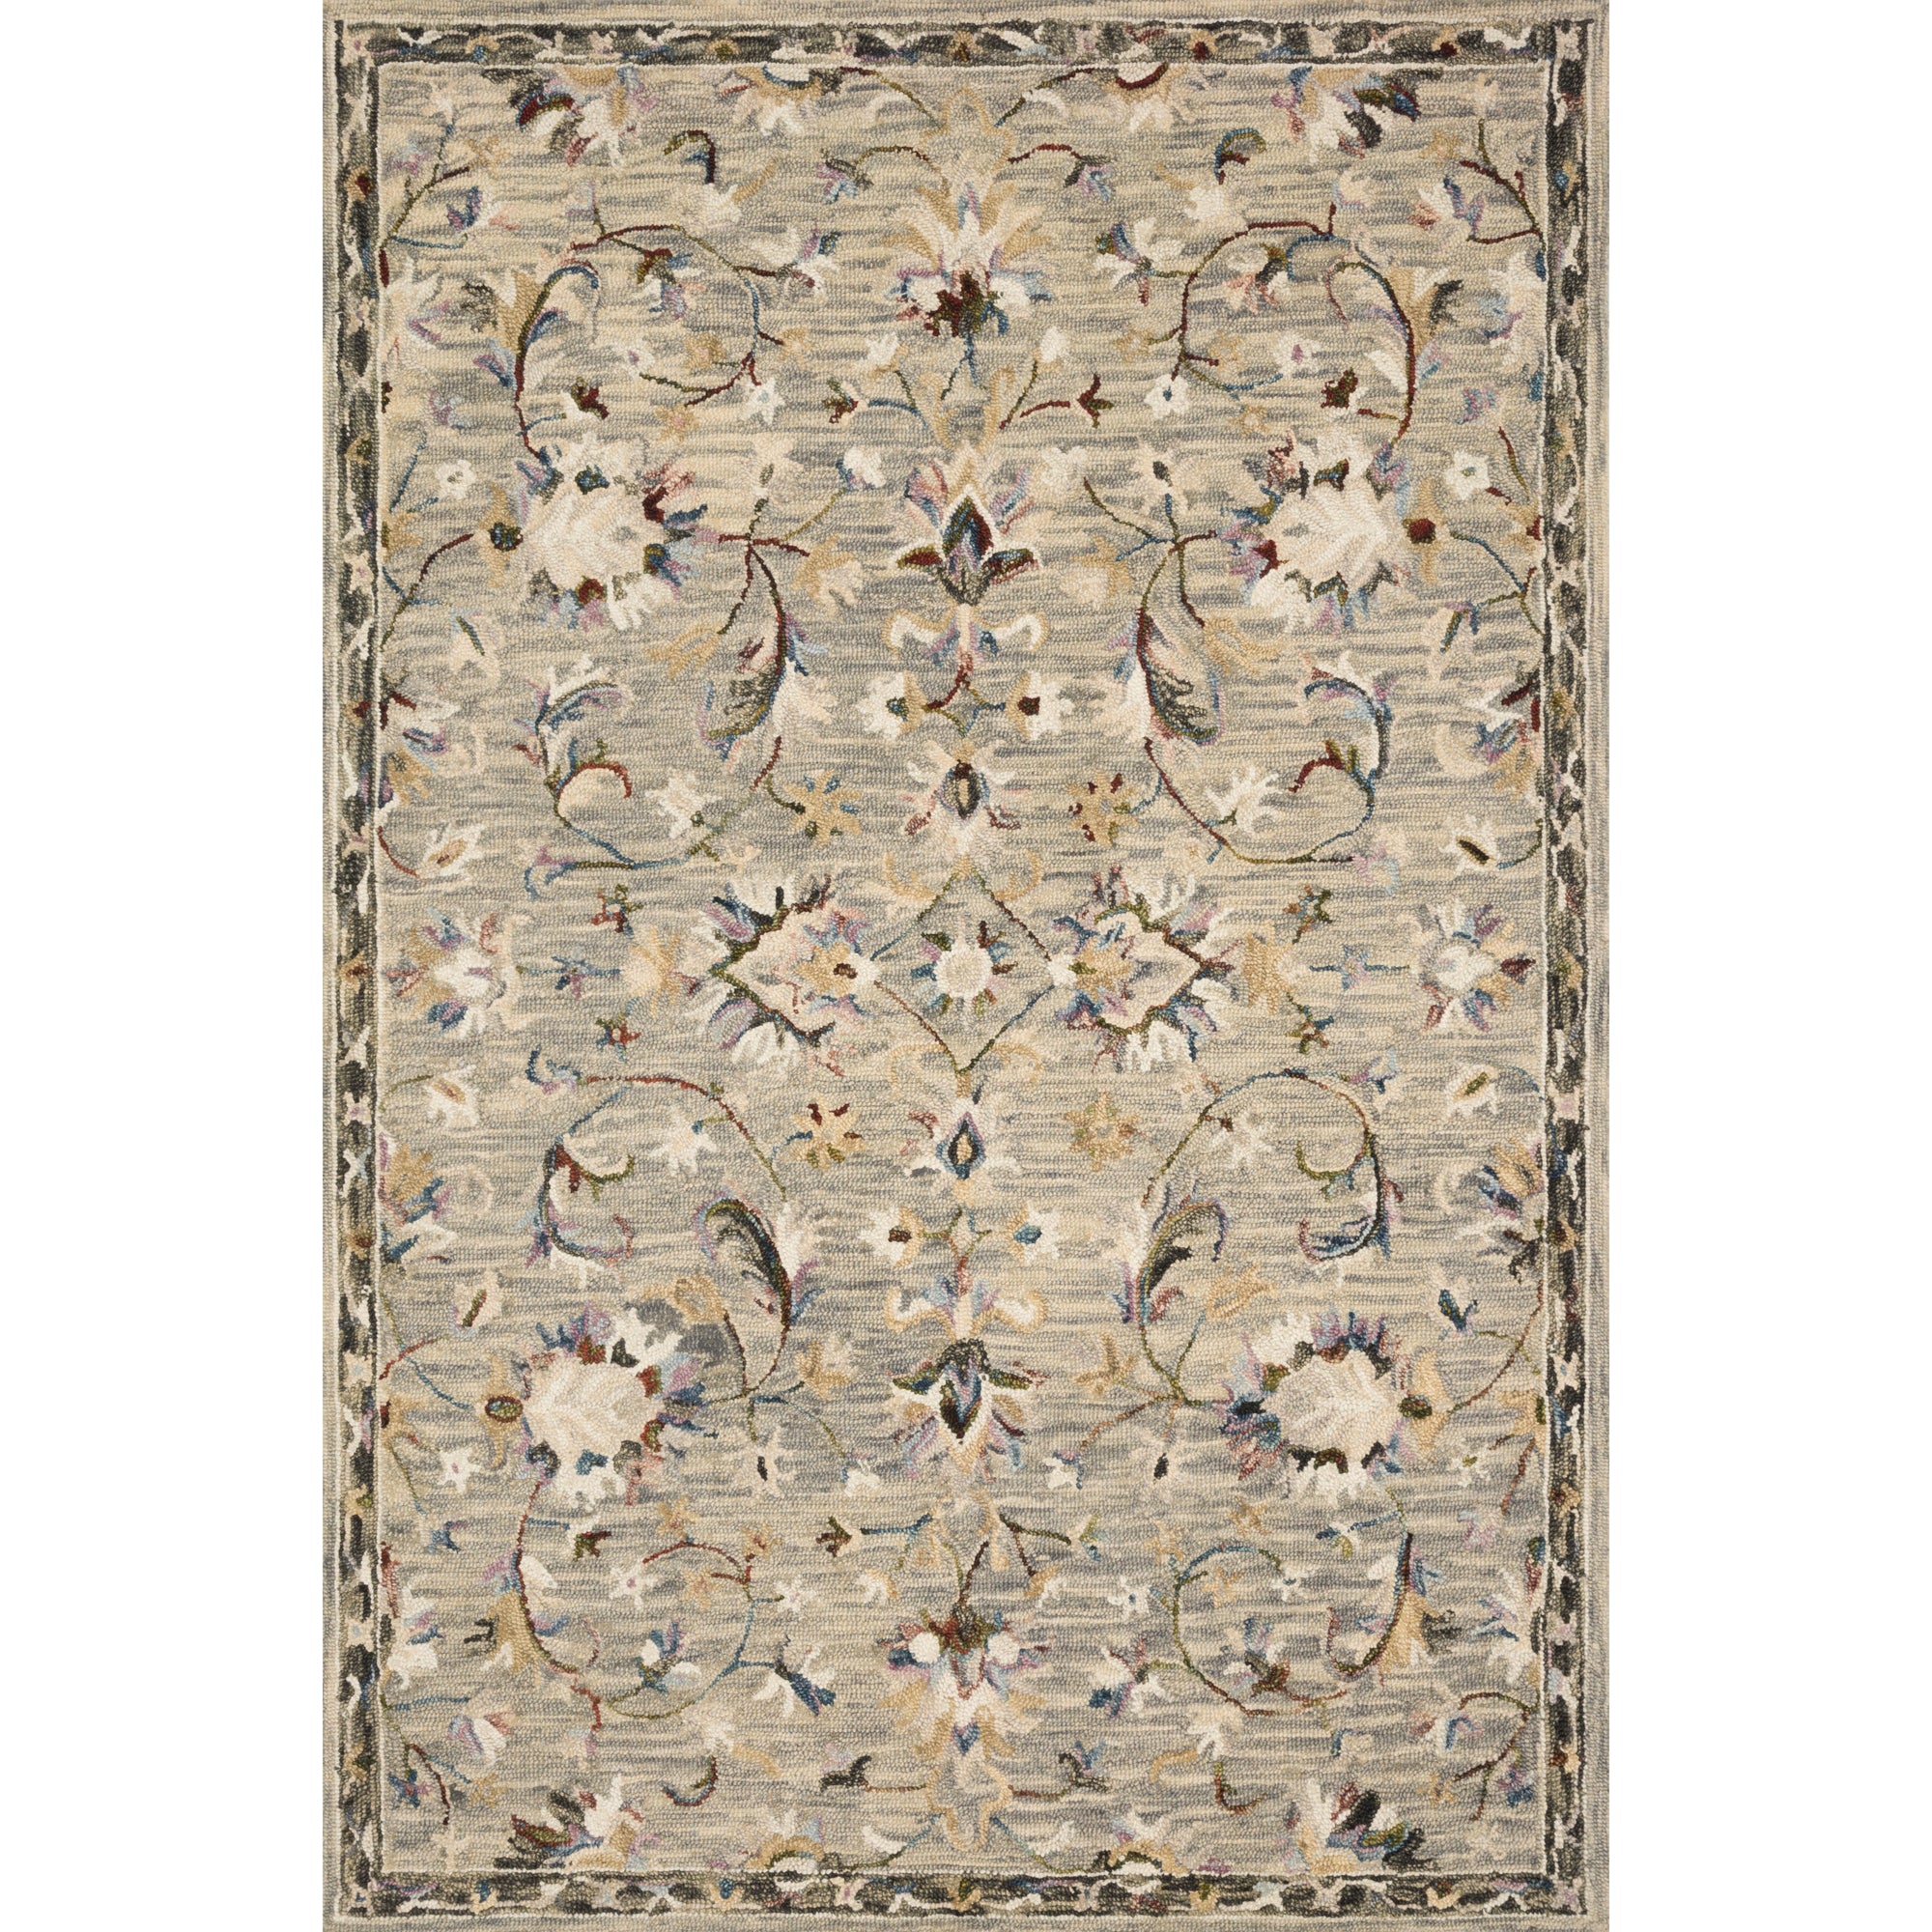 Rugs by Roo Loloi Beatty Grey Multi Area Rug in size 18" x 18" Sample